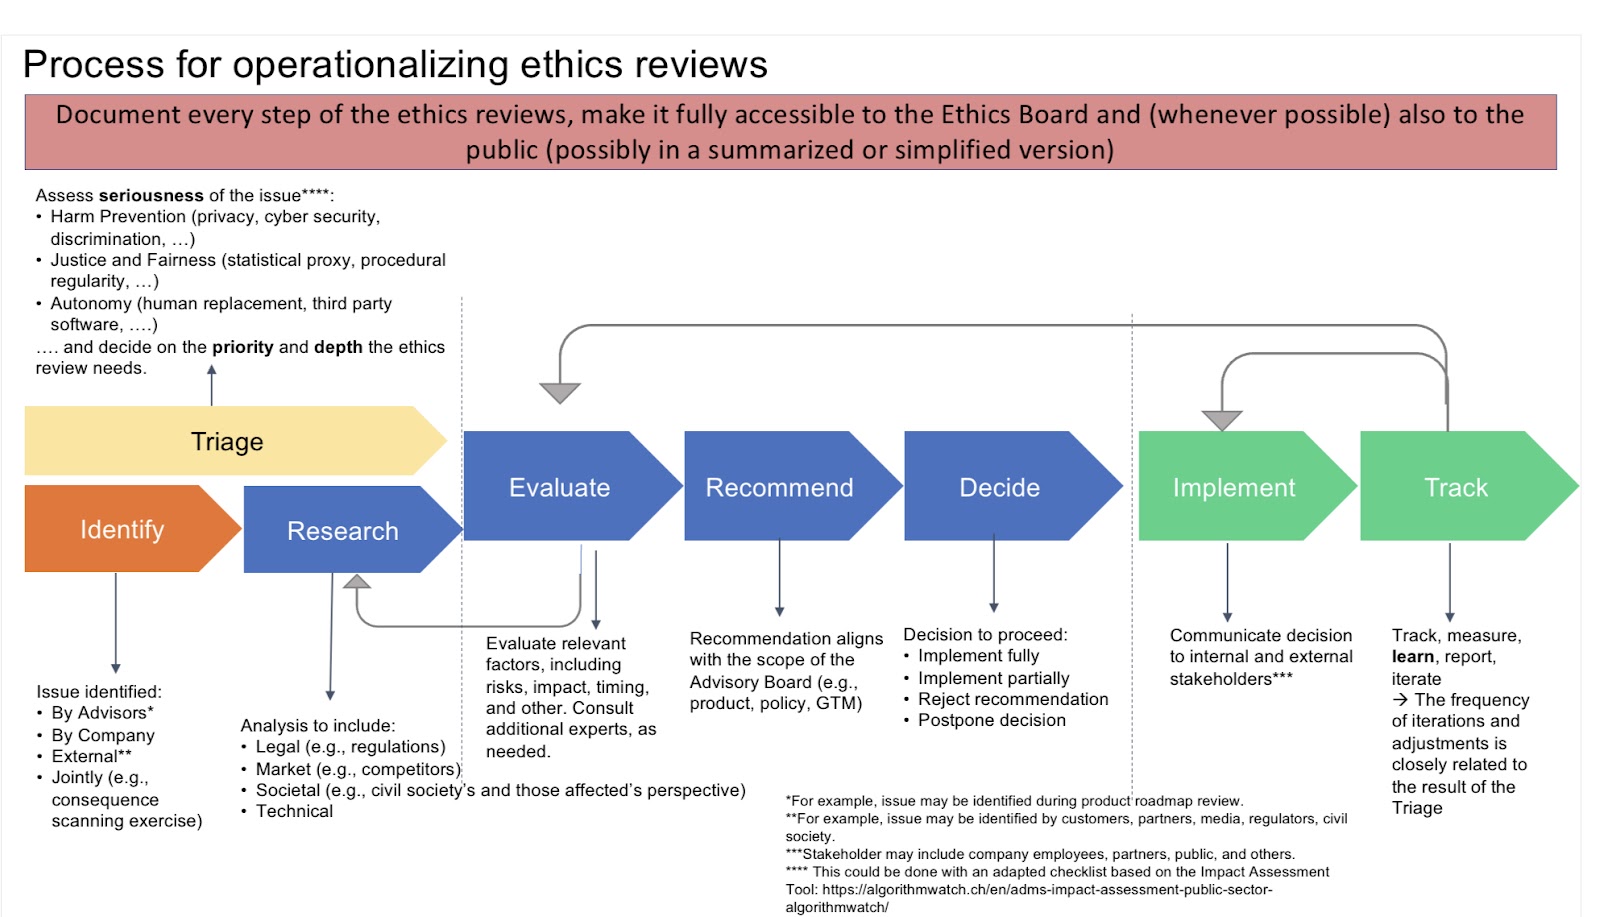 Process for operationalizing ethics shown in the form of a multi step process: Triage (Identify, Research), Evaluate, Recommend, Decide, Implement, Track